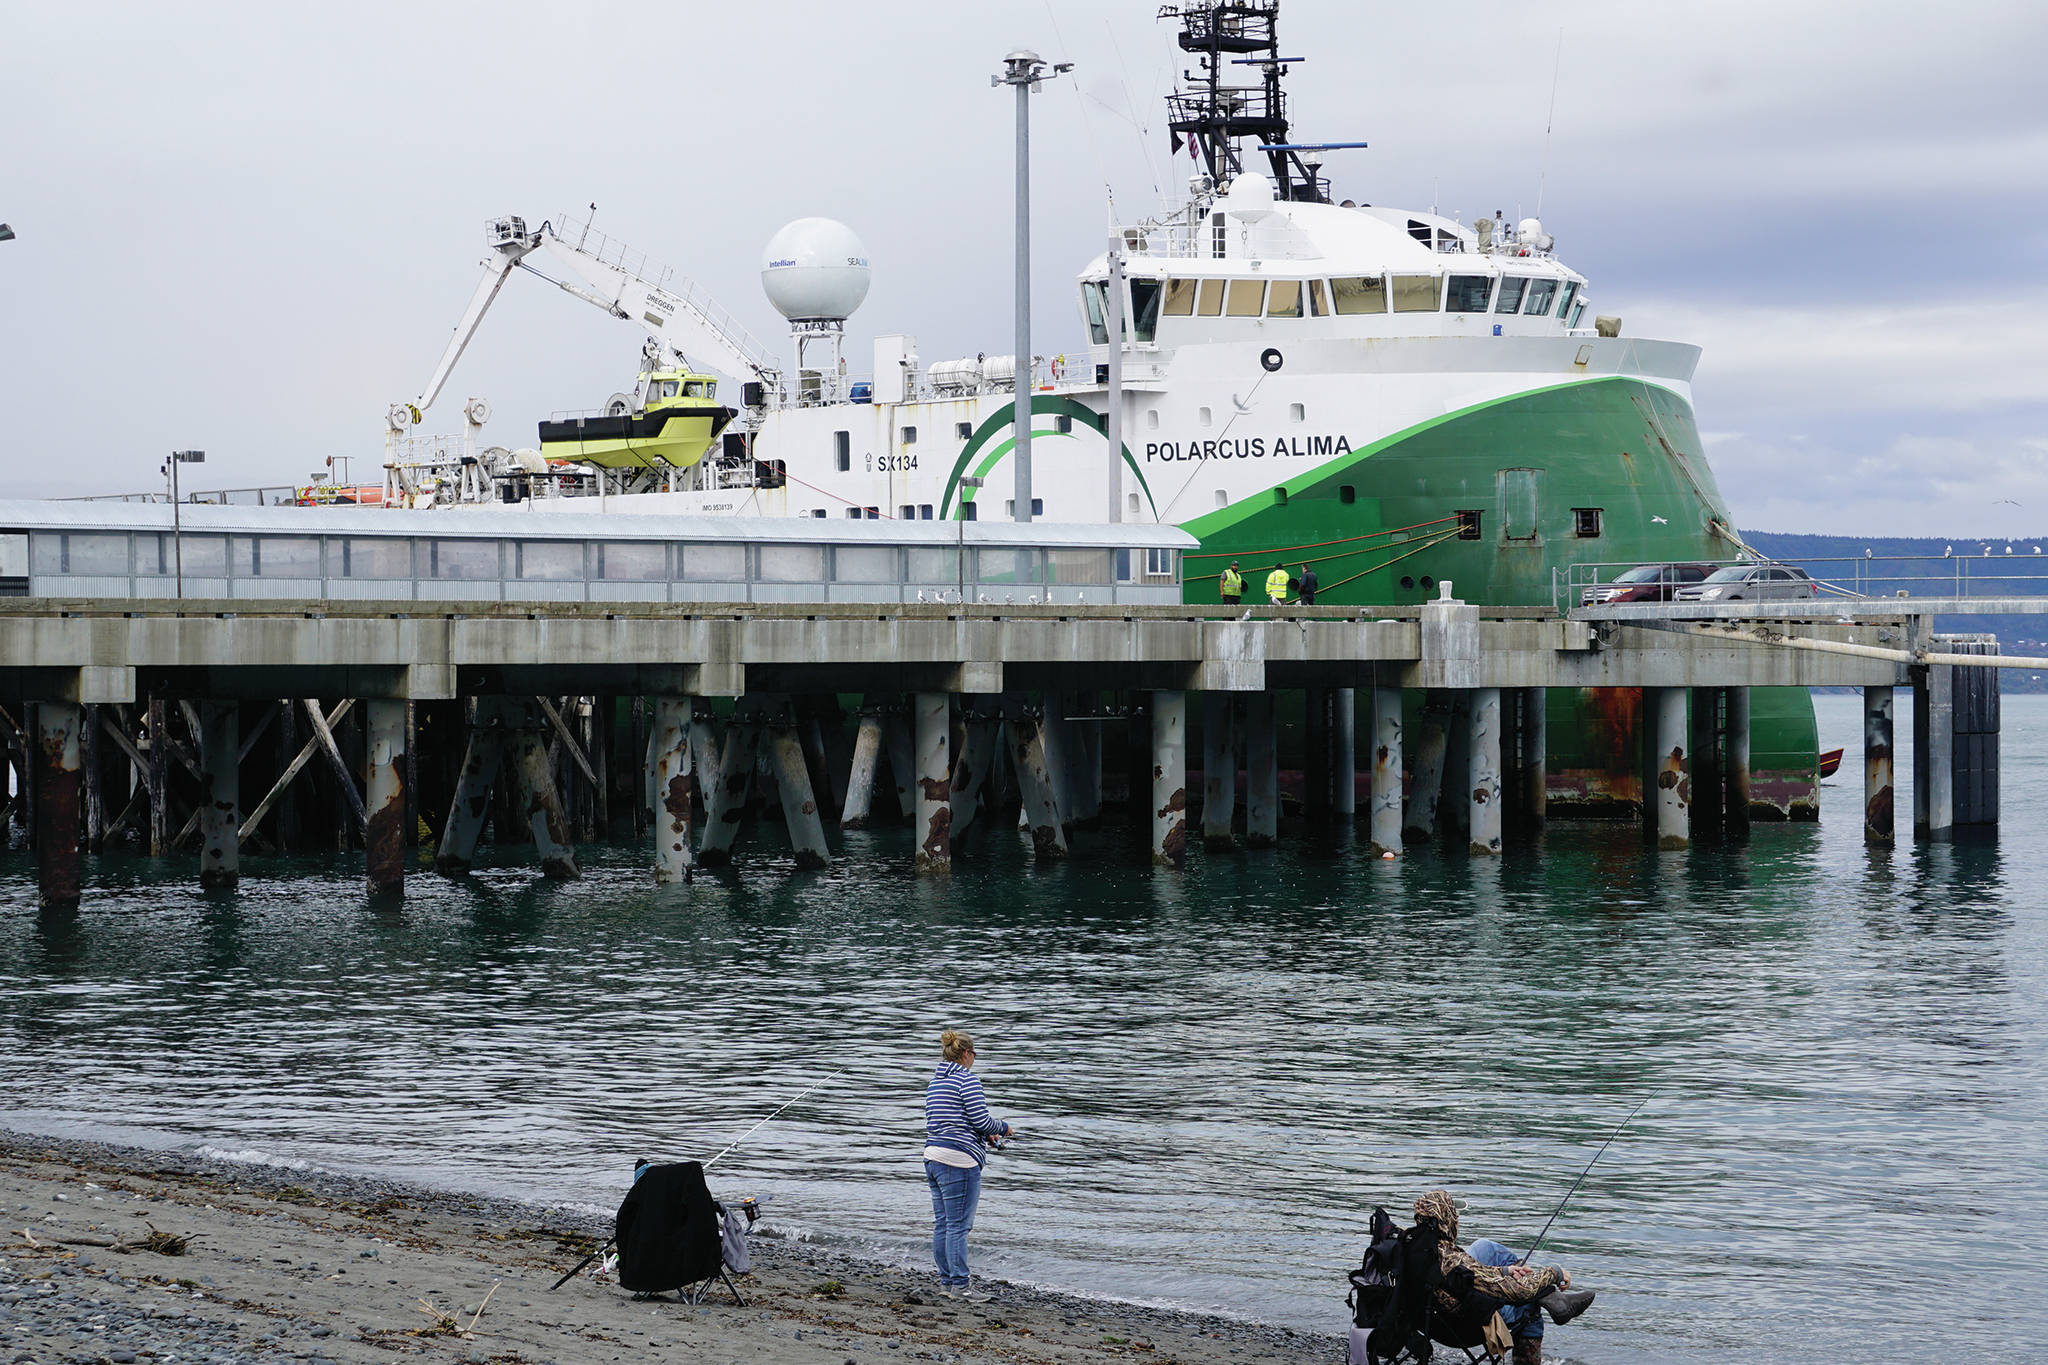 The Polarcus Alima is moored at the Pioneer Dock on the Homer Spit on Monday, Sept. 9, in Homer. The seismic exploration vessel will be used under contract to Hilcorp to do seismic testing in federal waters of lower Cook Inlet in September. (Photo by Michael Armstrong/Homer News)